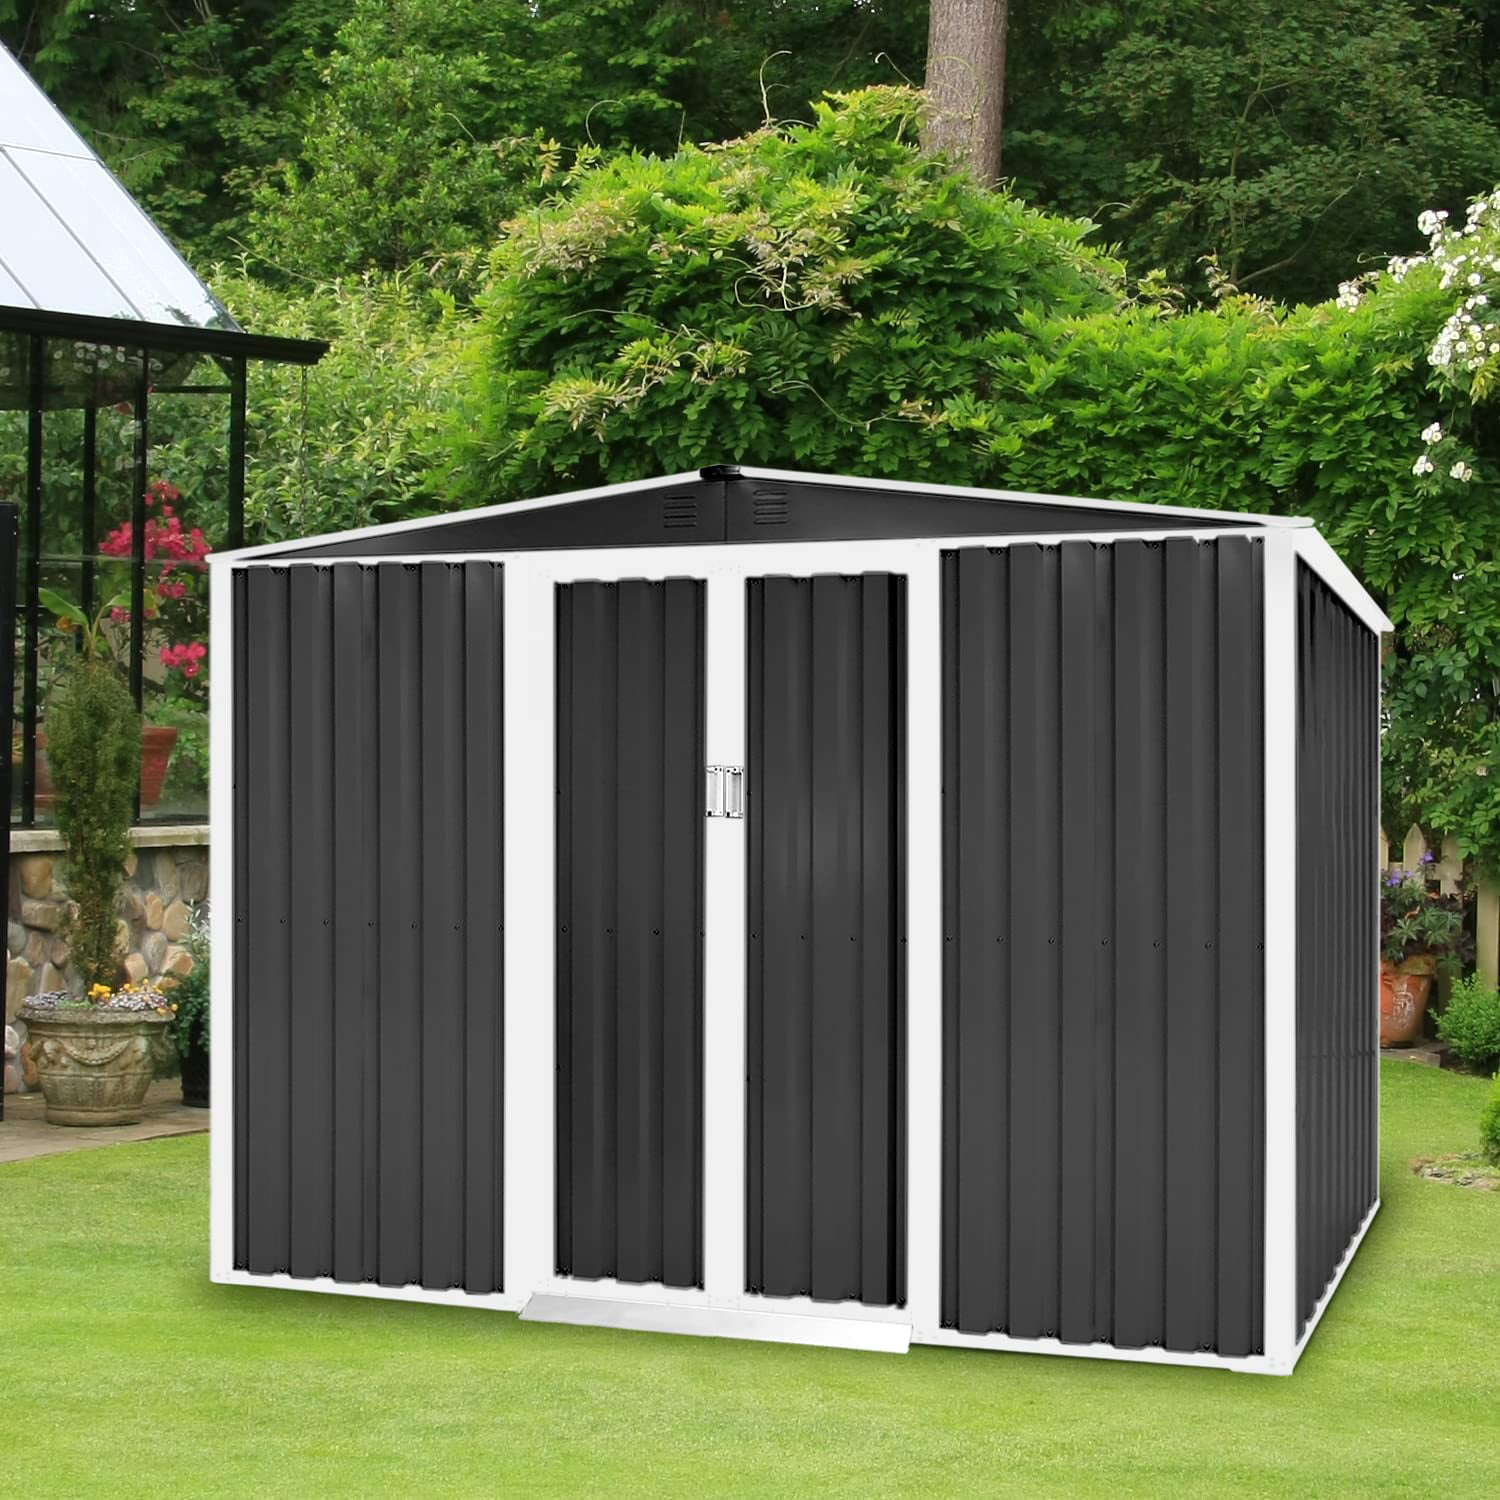 Green SOLAURA 6x4 Outdoor Vented Storage Shed Garden Backyard Tool Steel Cabin 